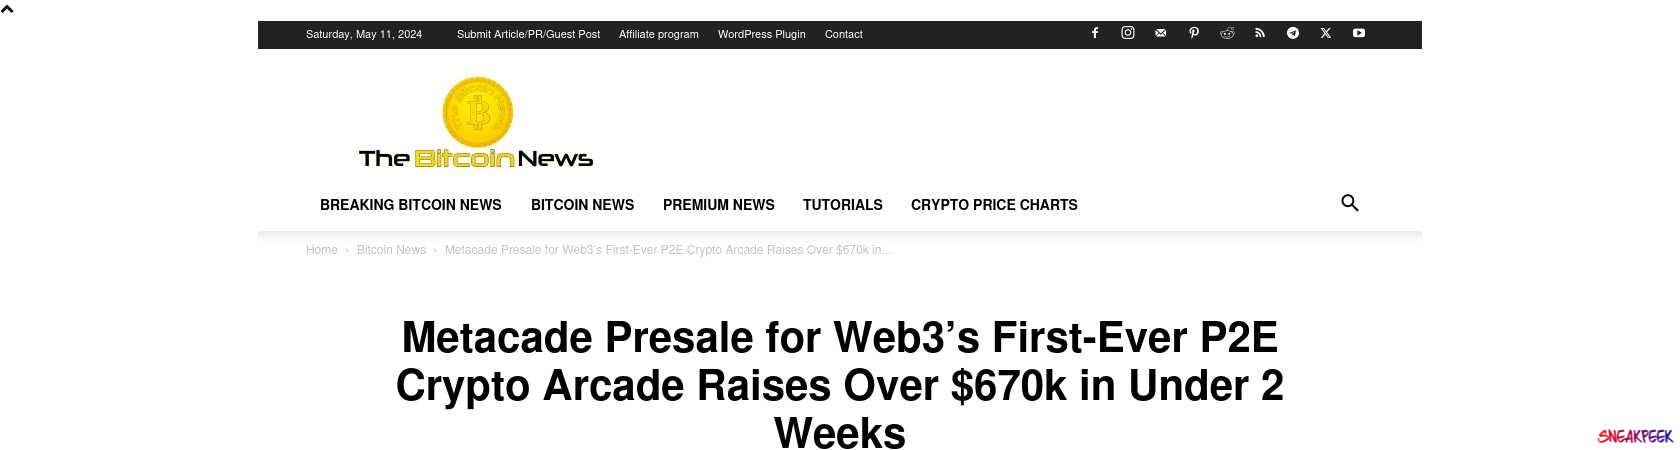 Read the full Article:  ⭲ Metacade Presale for Web3’s First-Ever P2E Crypto Arcade Raises Over $670k in Under 2 Weeks